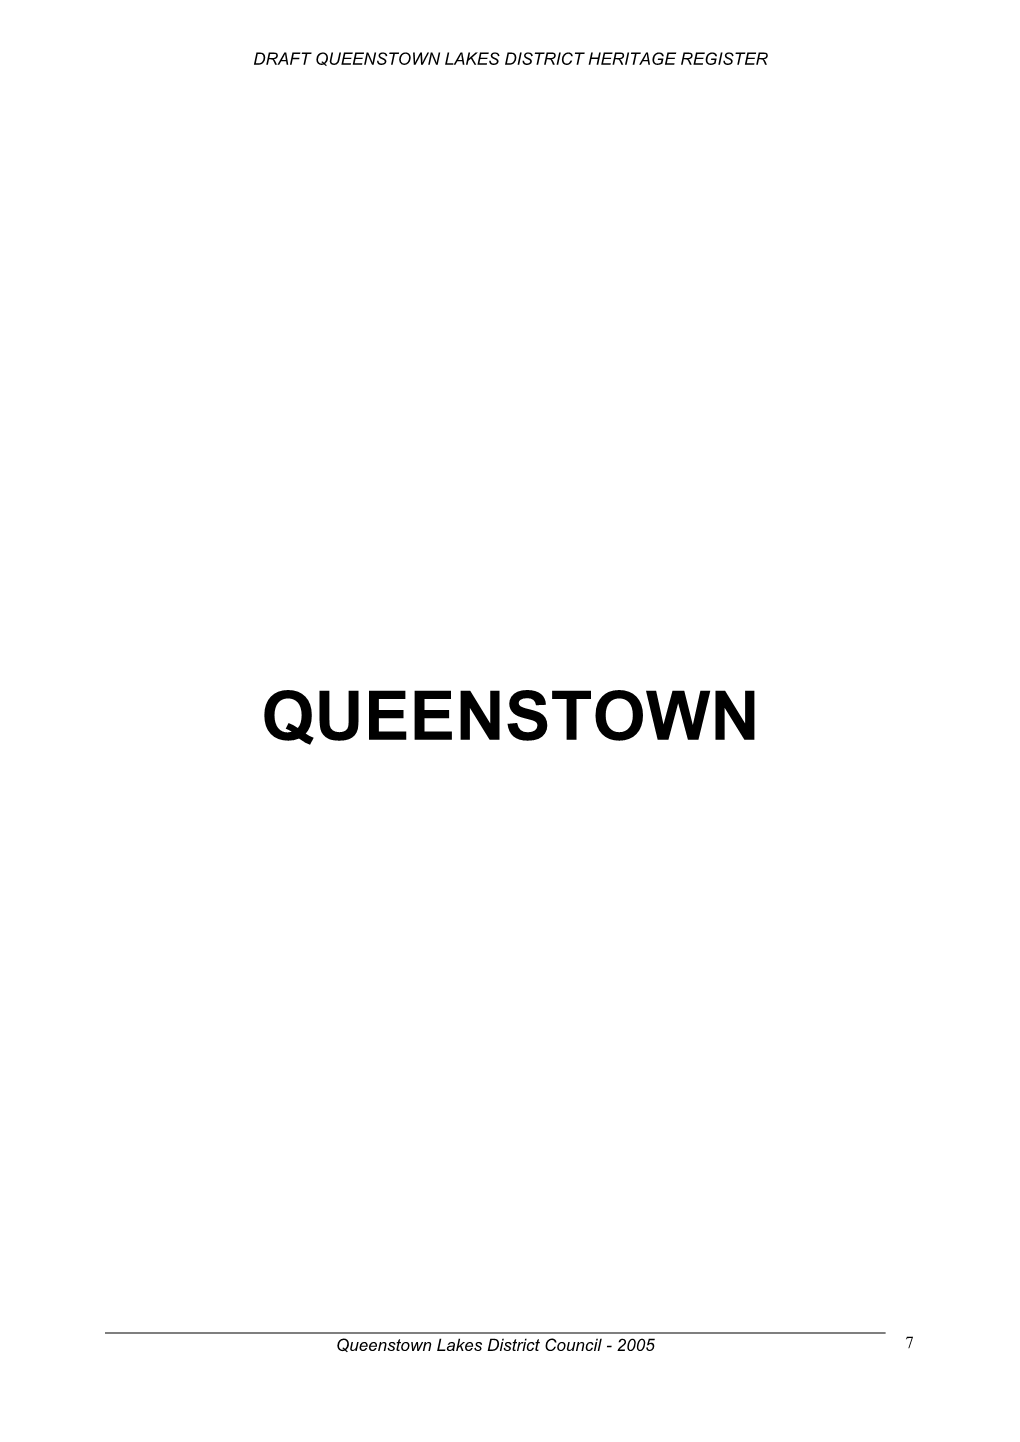 Queenstown Lakes District Council - 2005 7